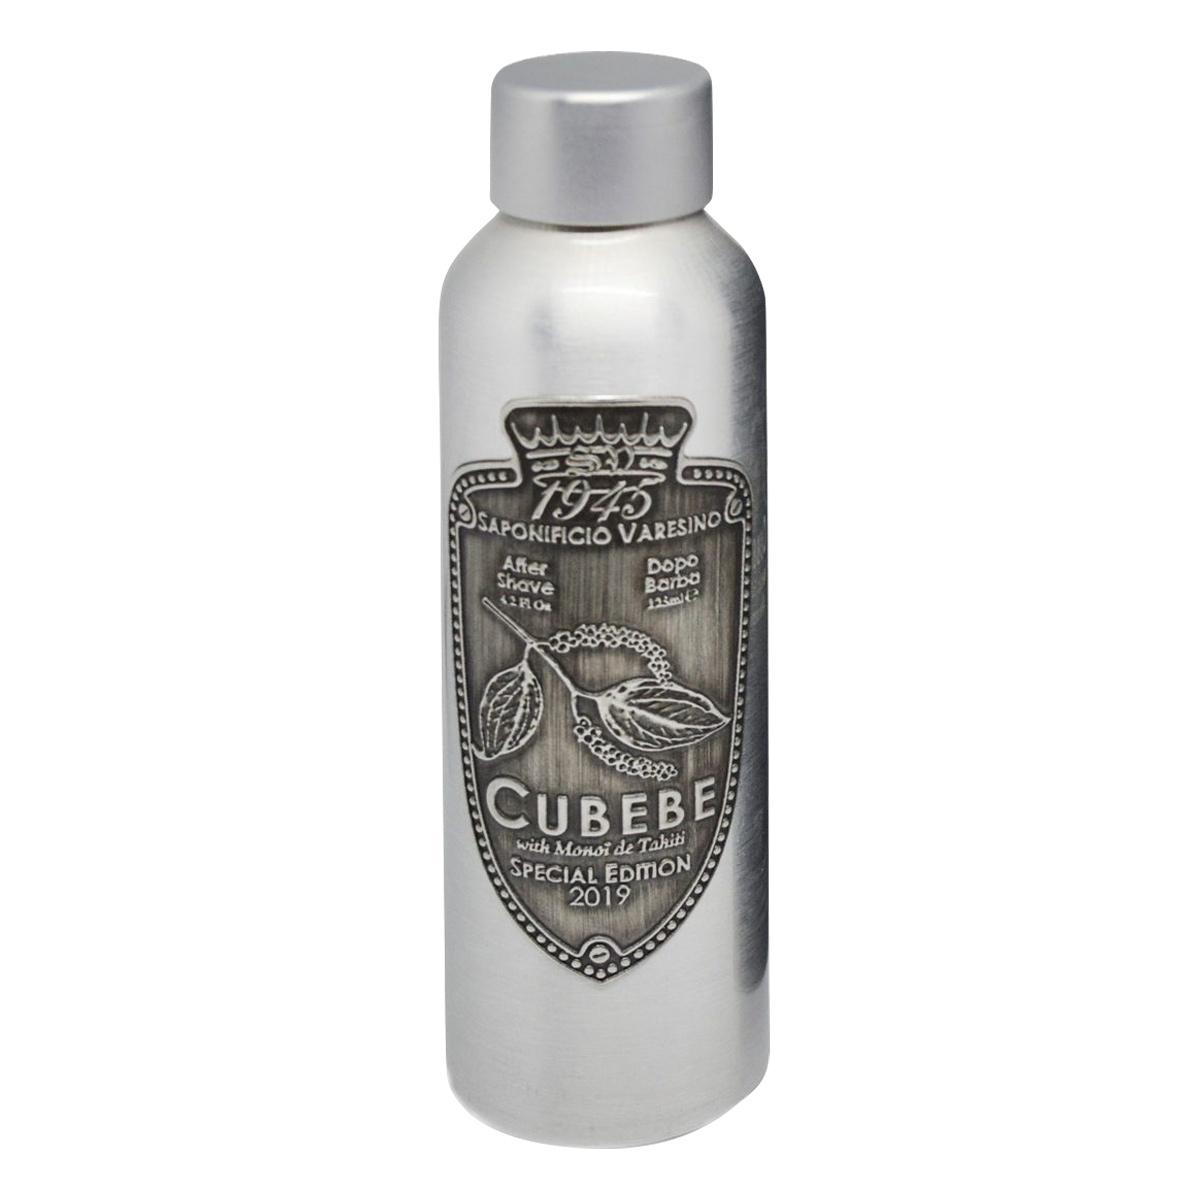 Primary image of Aftershave - Cubebe